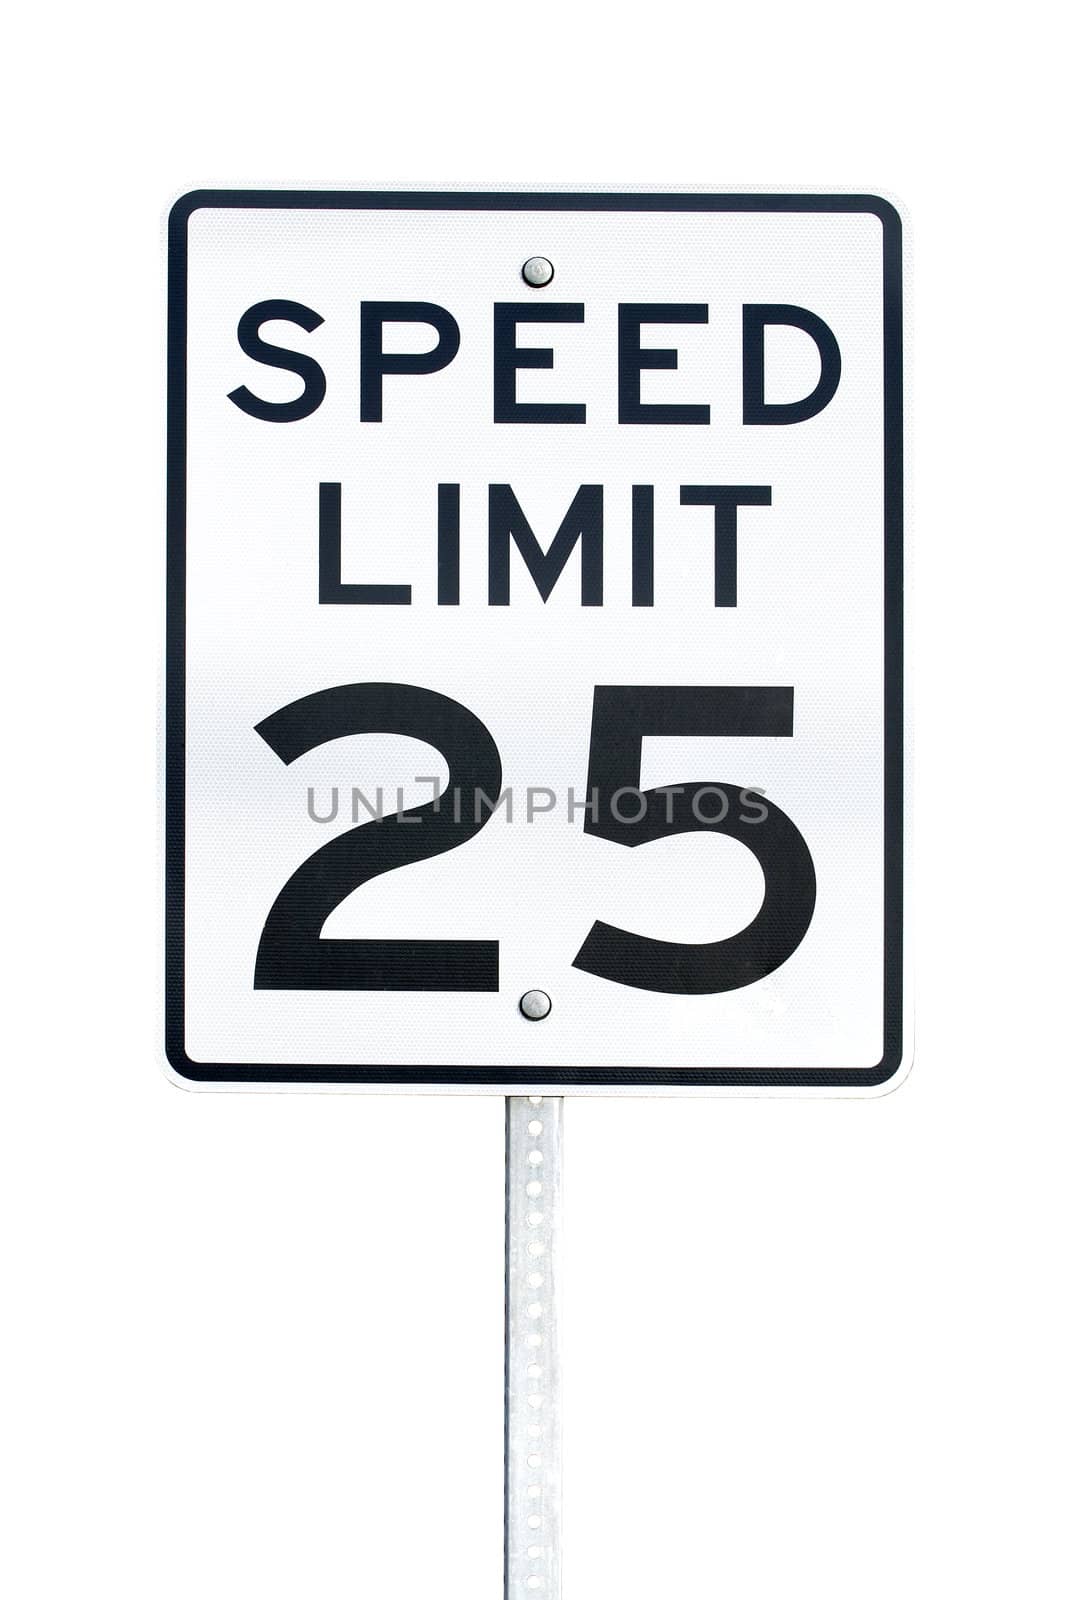 Speed limit 25 mph sign isolated on white background